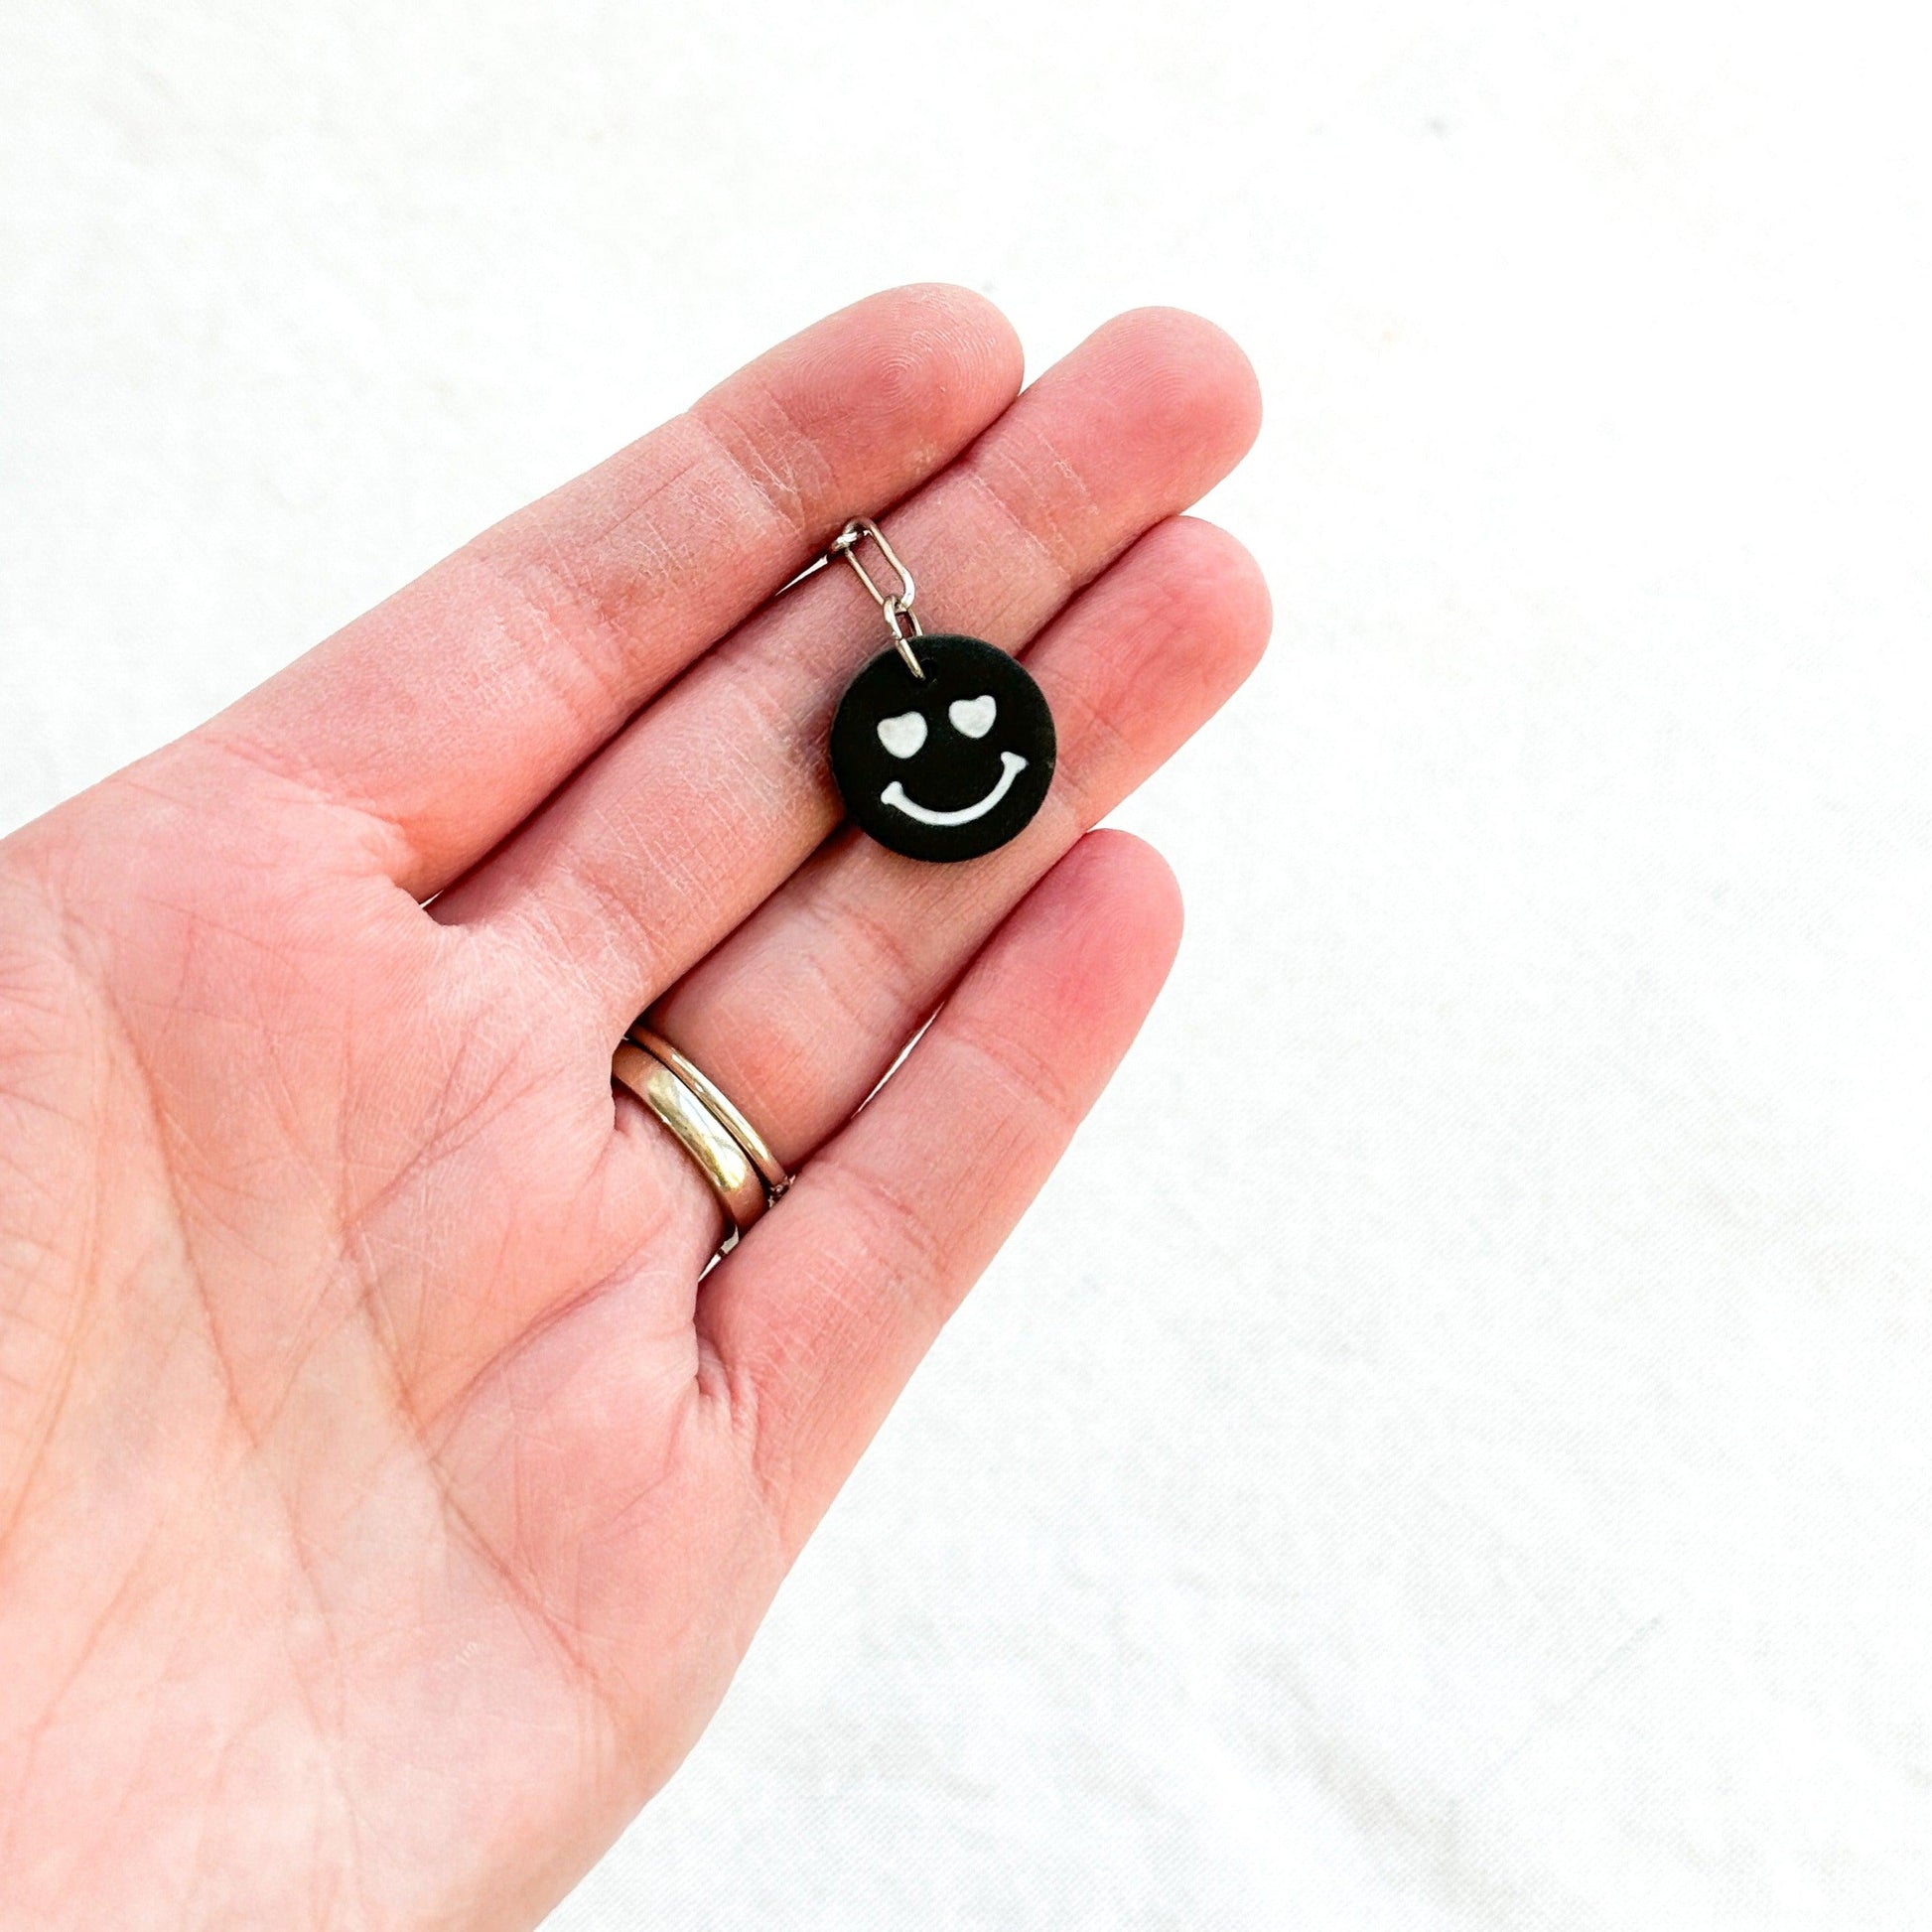 Smiley Face Stanley Cup Charm, Stanley Accessories, Best Gifts for Women, Polymer Clay Charms, Birthday Gift Ideas, Black Charms - Harbor to Gulf Co.